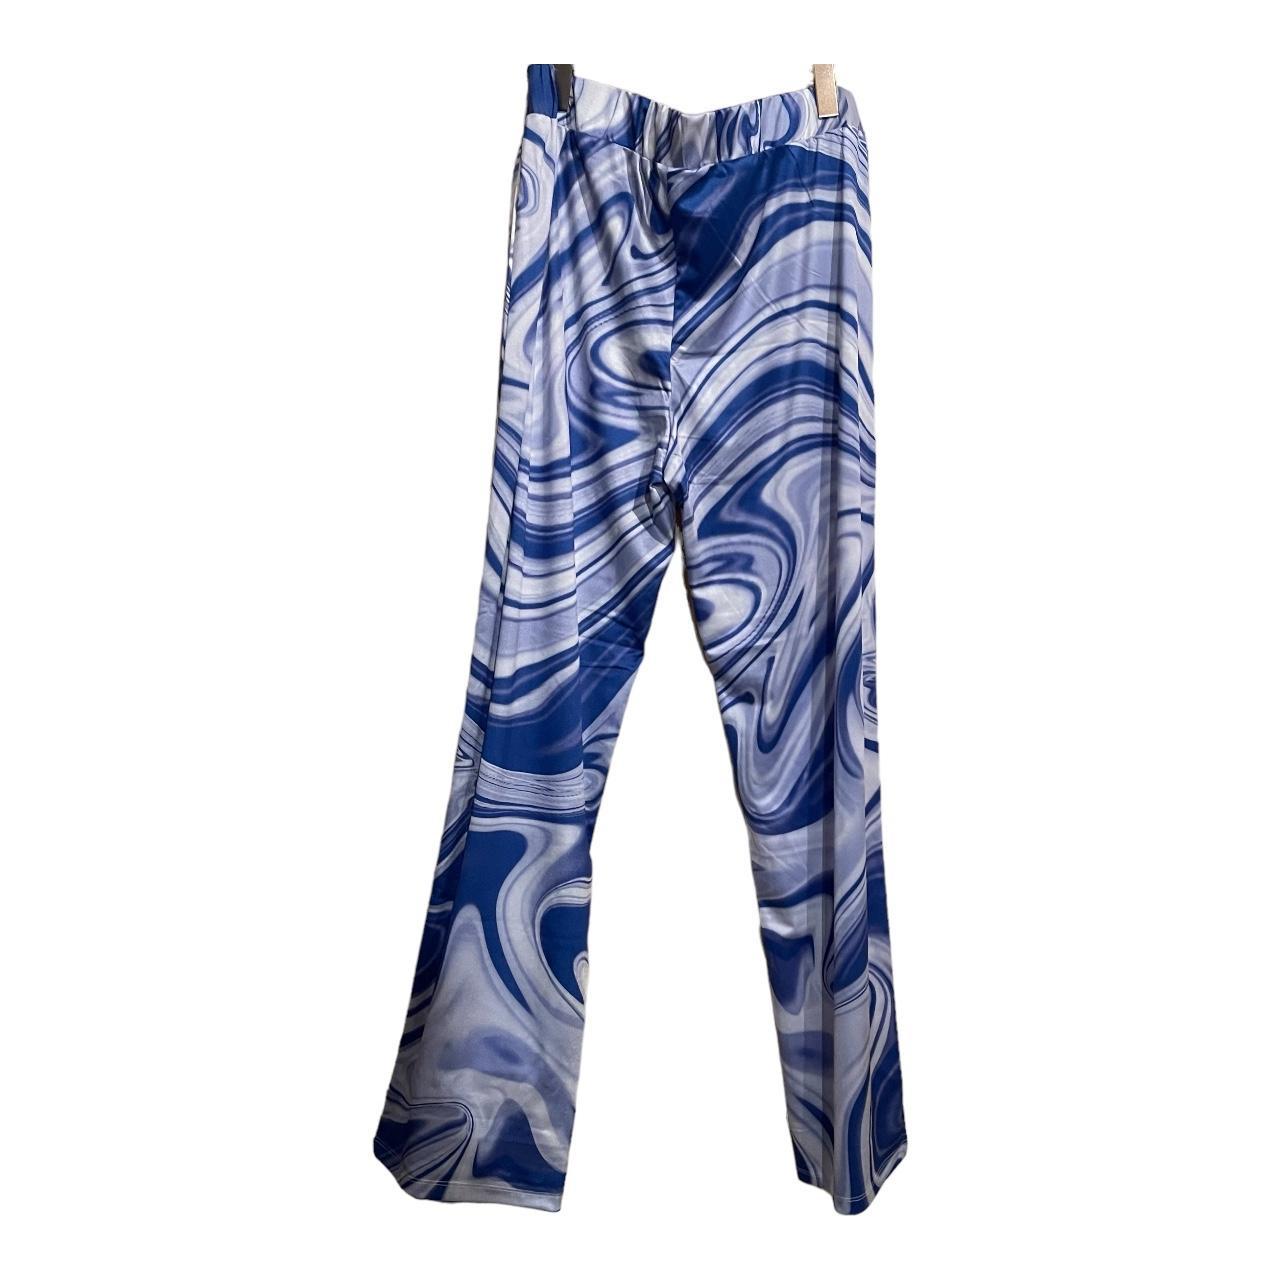 Hosbjerg Women's Blue and White Trousers (2)